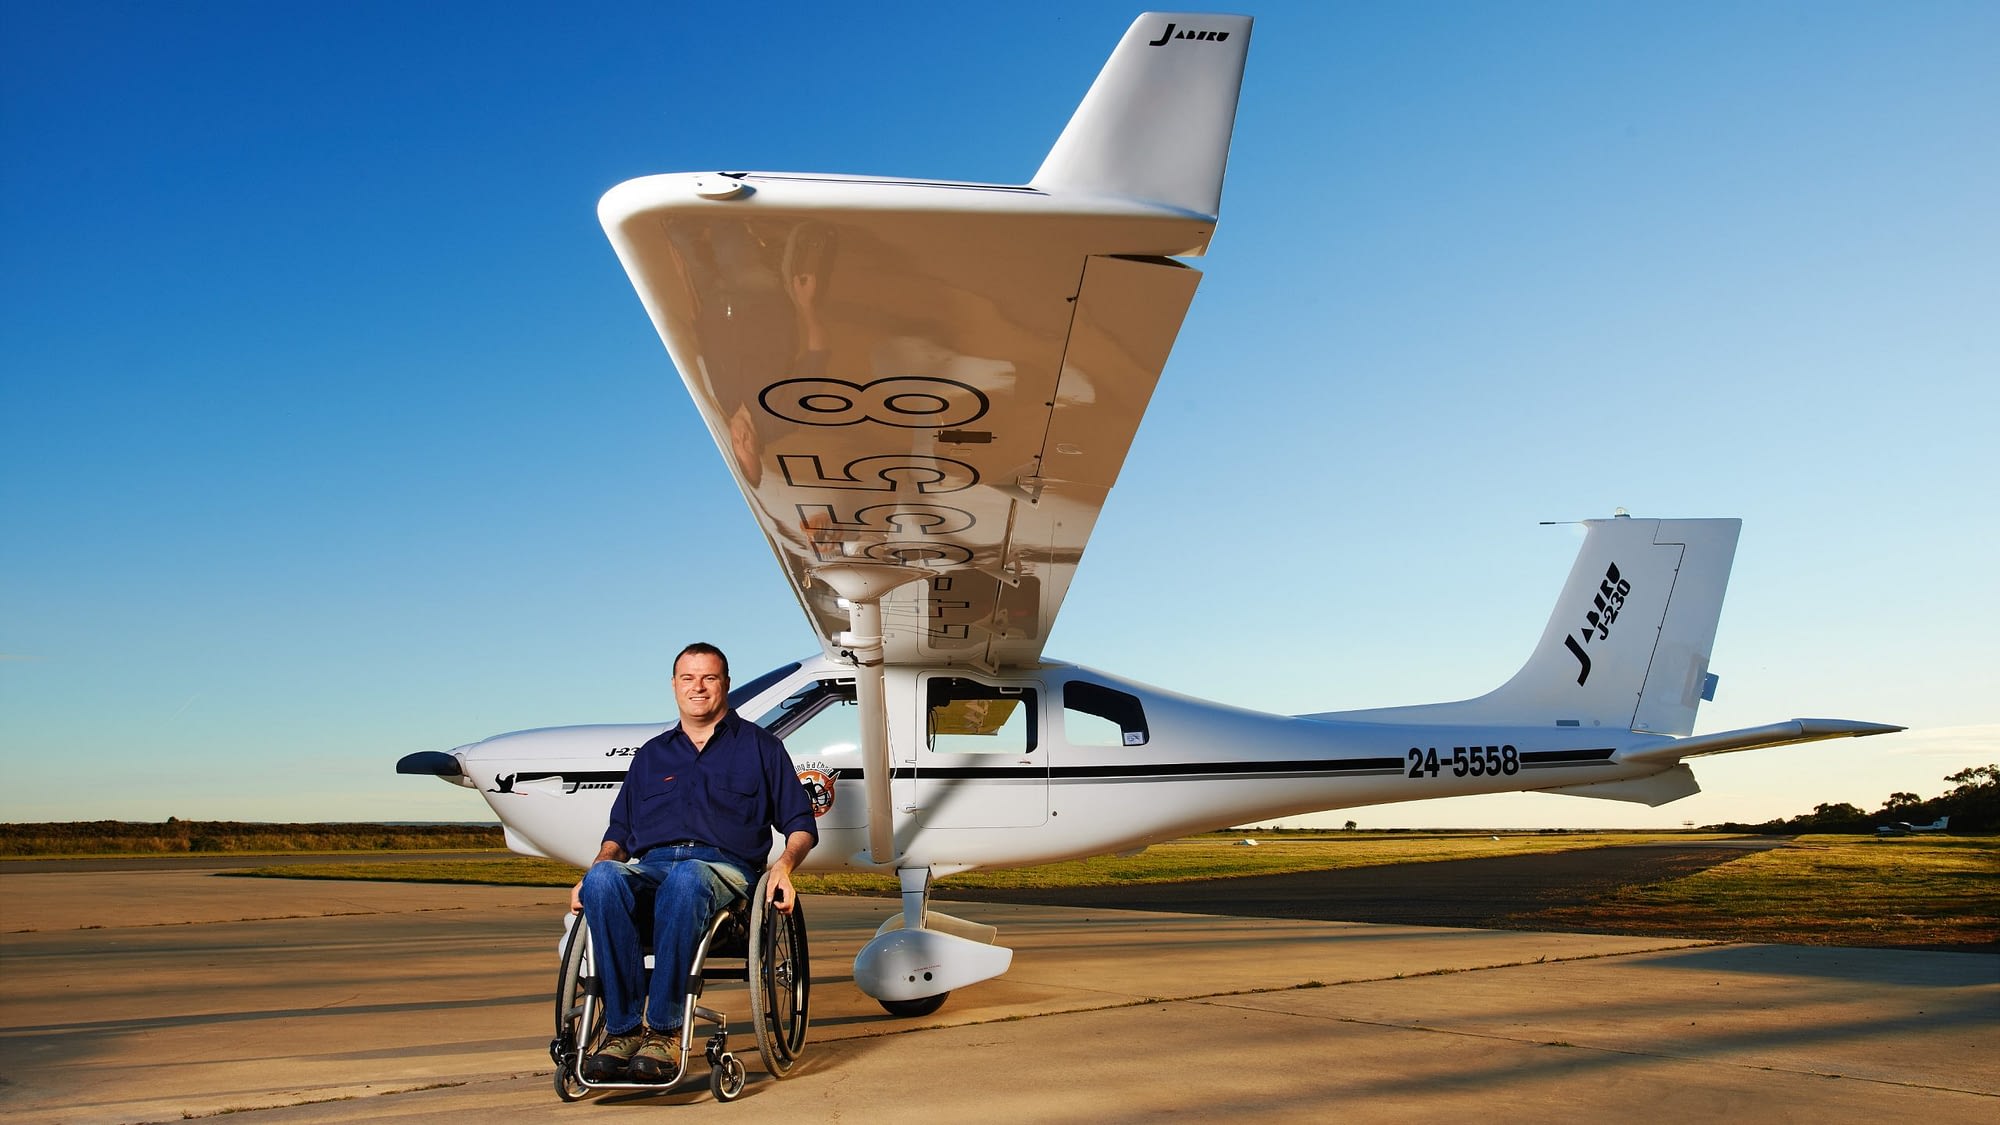 Image: Dave Jacka in his wheelchair in front of his plane